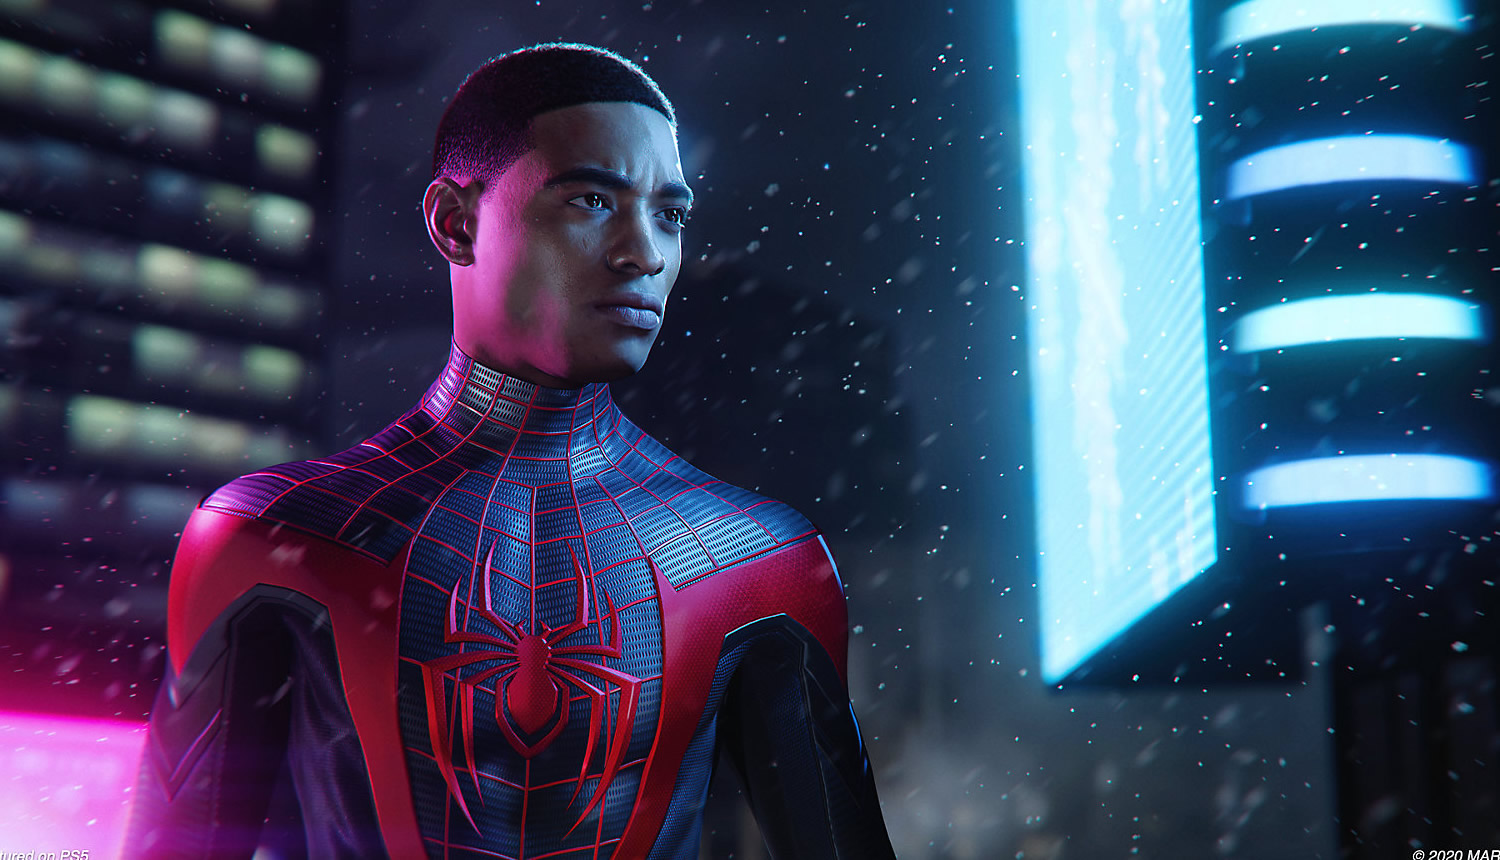 Spider-Man' (2018) PS4 Review: The Good, The Bad And The Spidey